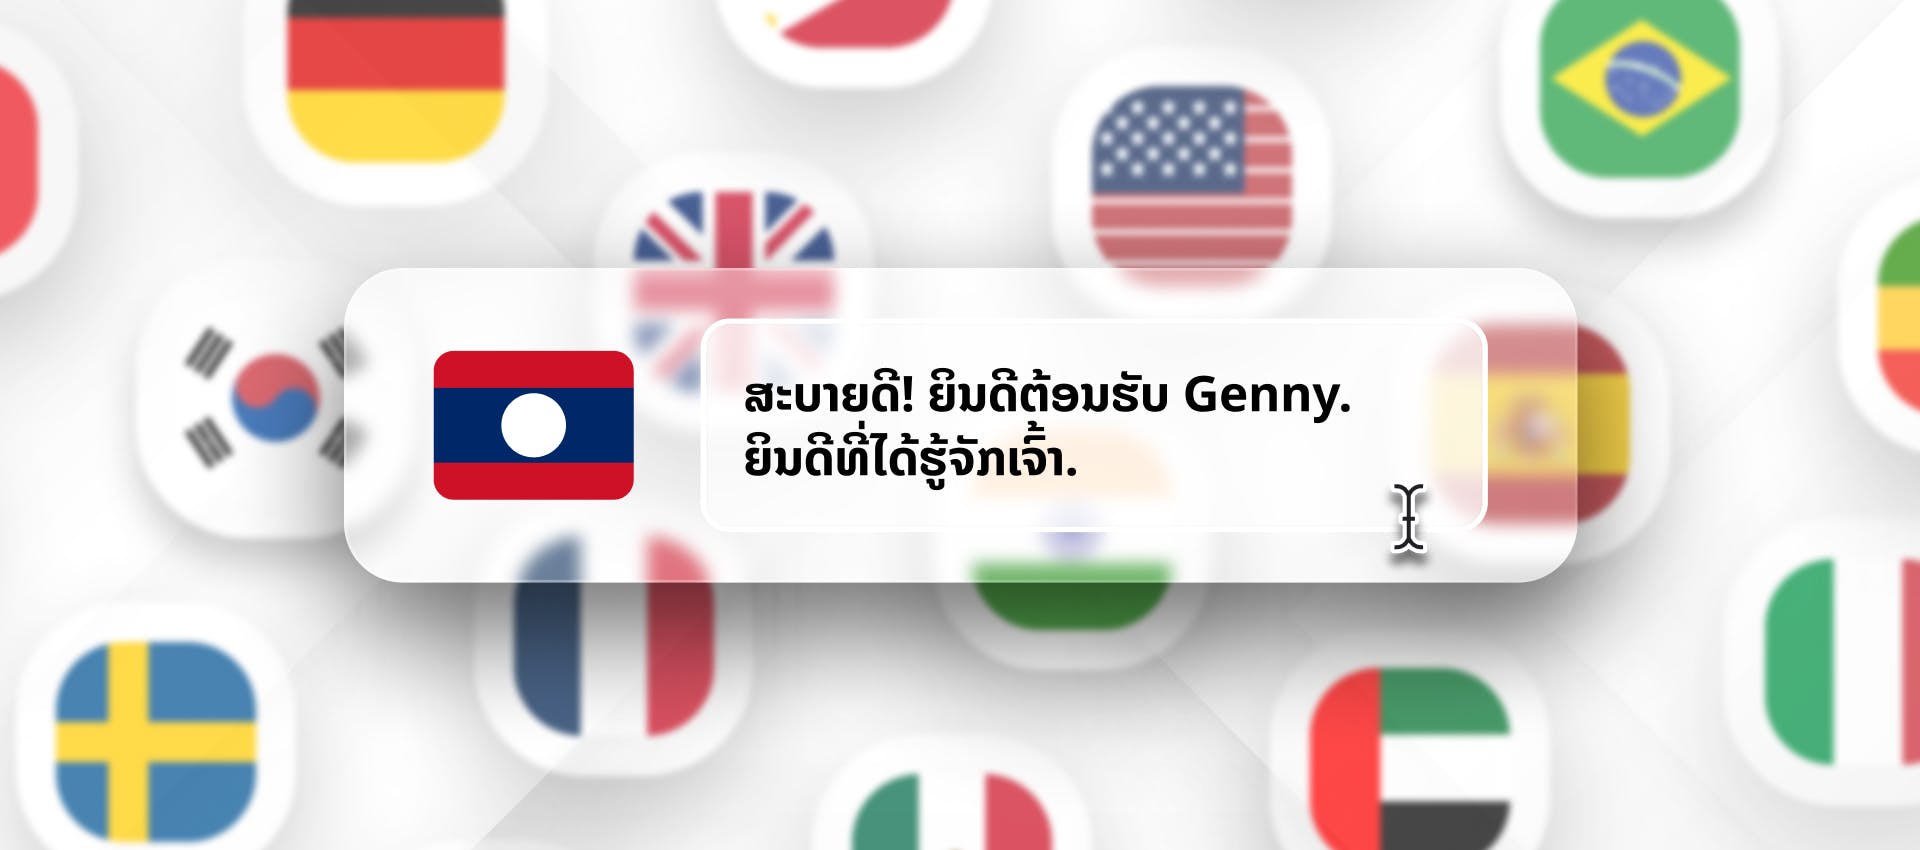 Lao phrase for Lao TTS generation with different flags in the background